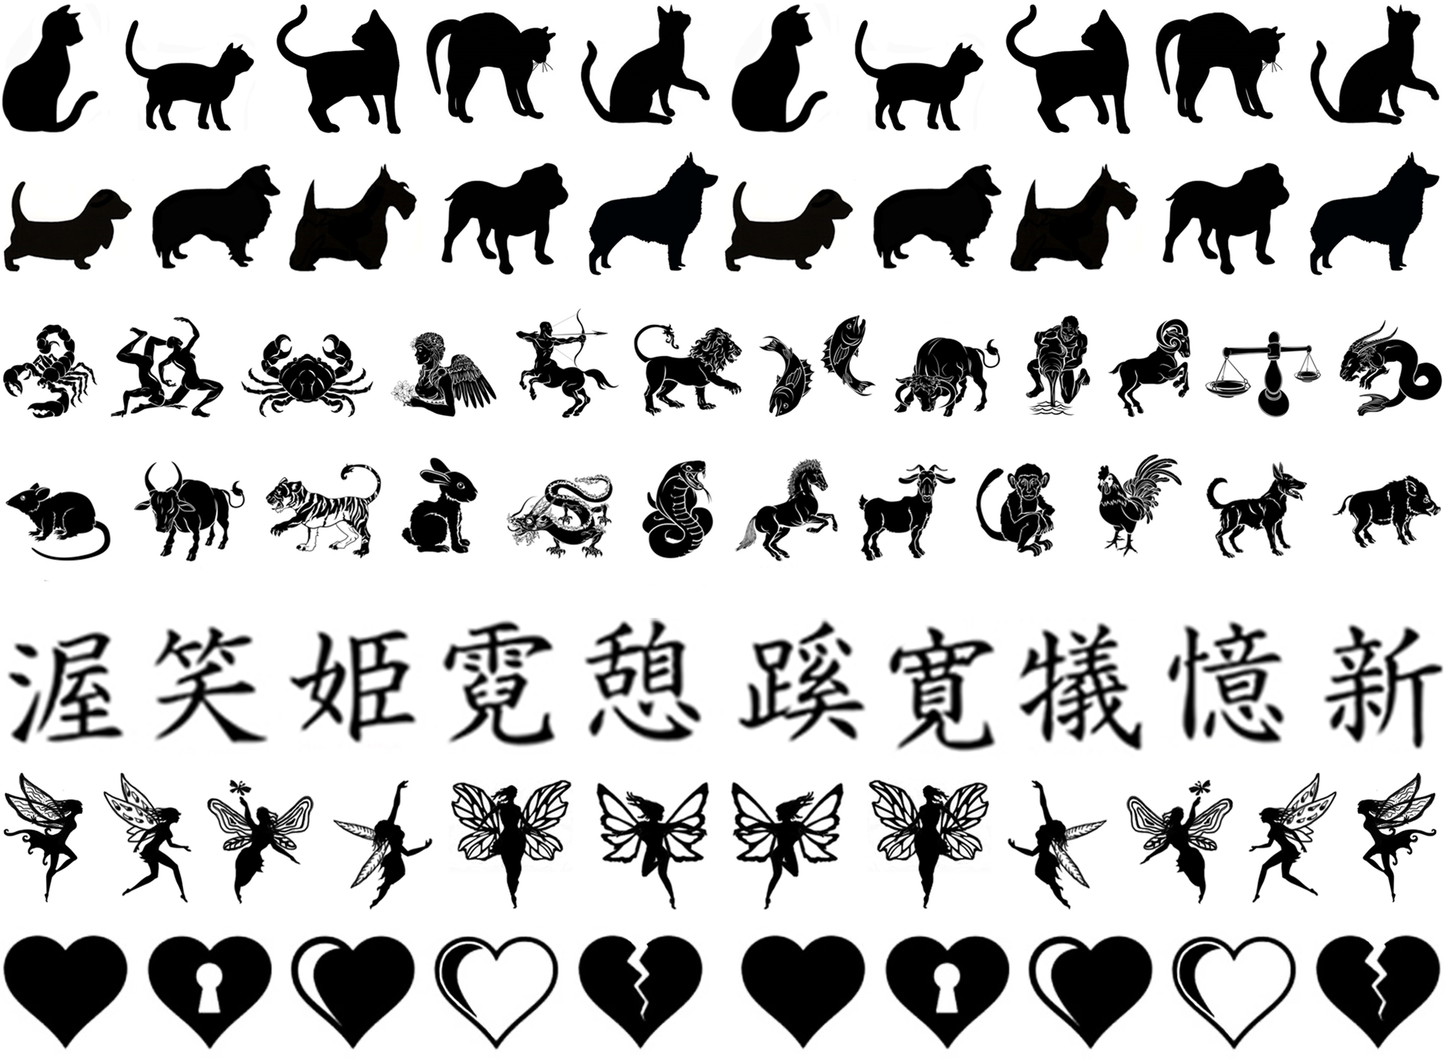 Cat to Heart 76 pcs 5/8" Black Fused Glass Decals